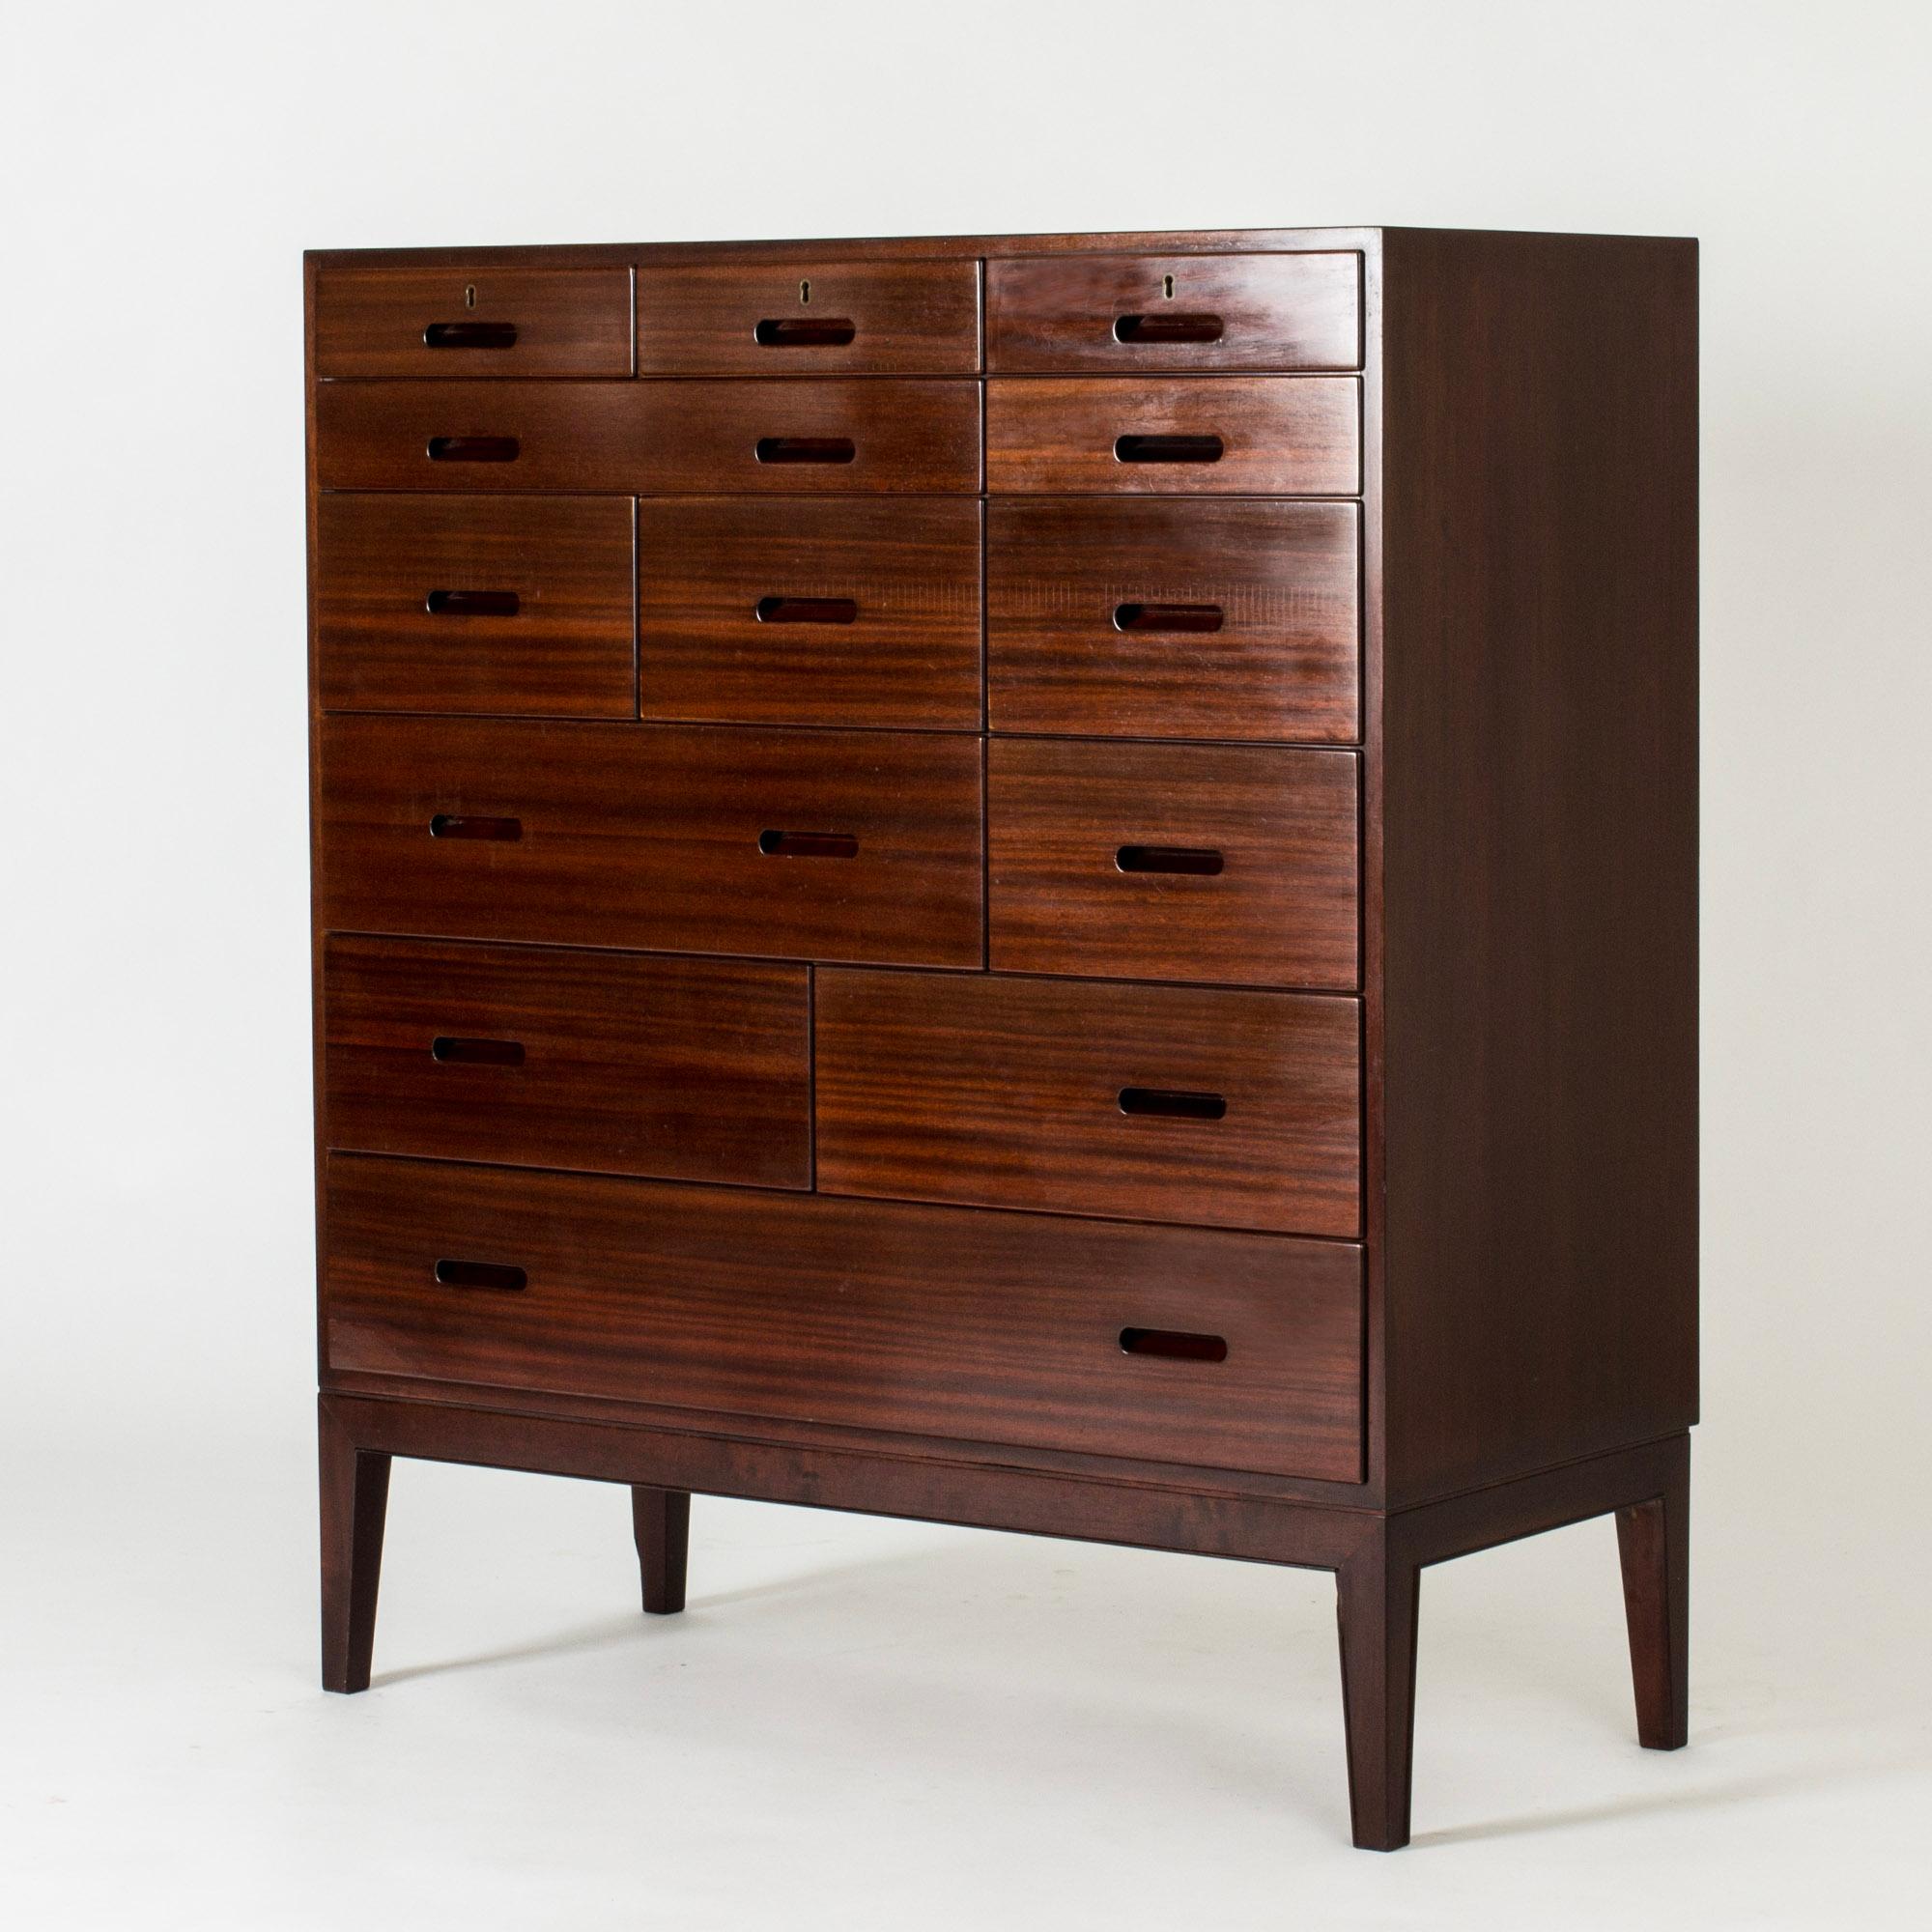 Striking chest of drawers by Kai Winding, made from rosewood. Large model with several drawers in different sizes, forming a cool pattern. Recessed drawer handles.